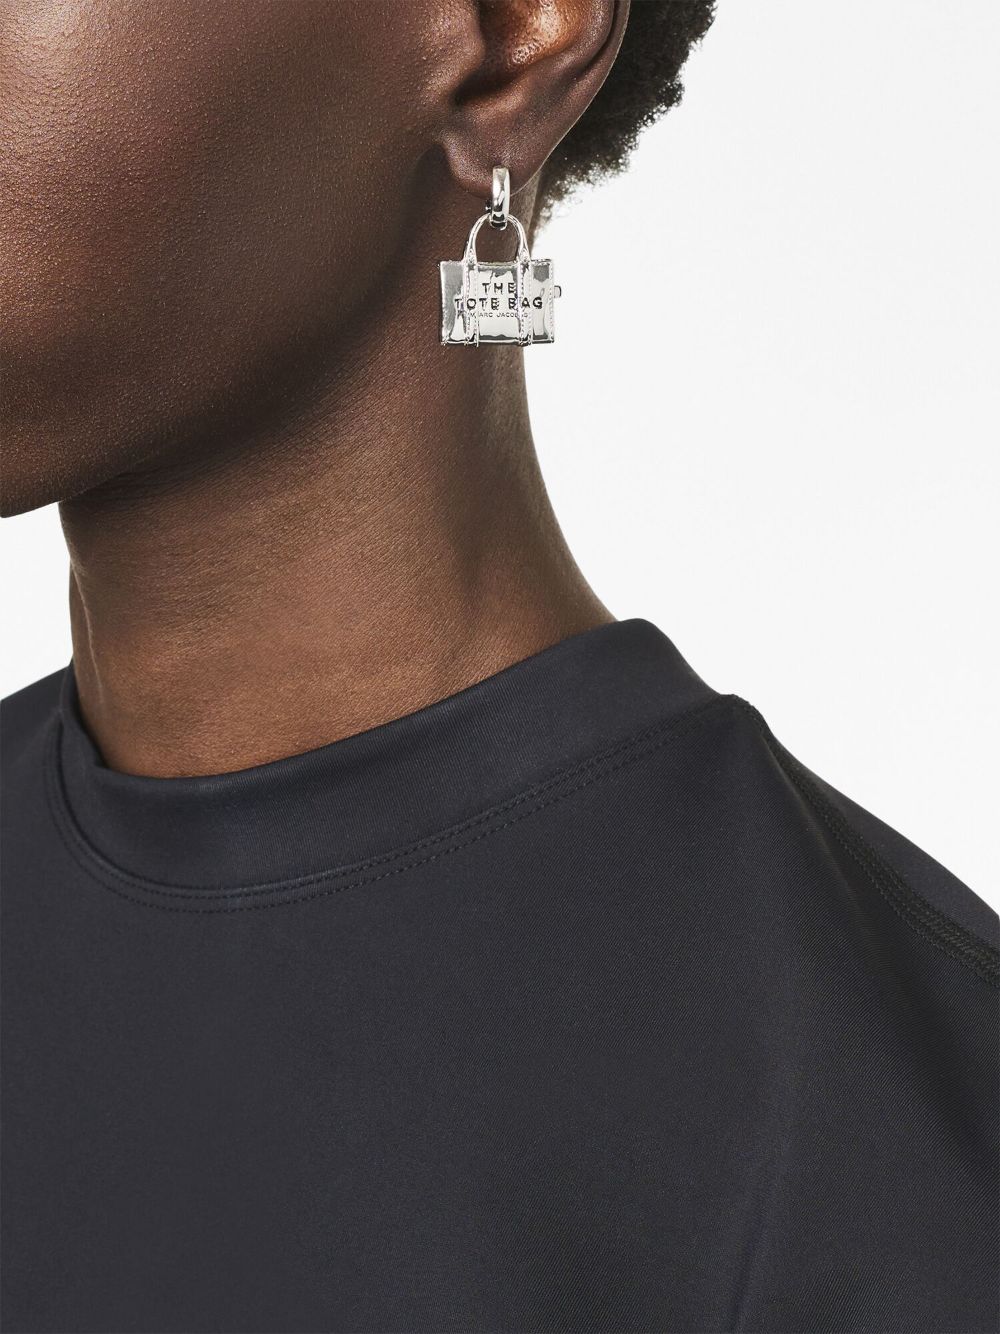 Image 2 of Marc Jacobs The Tote Bag earrings